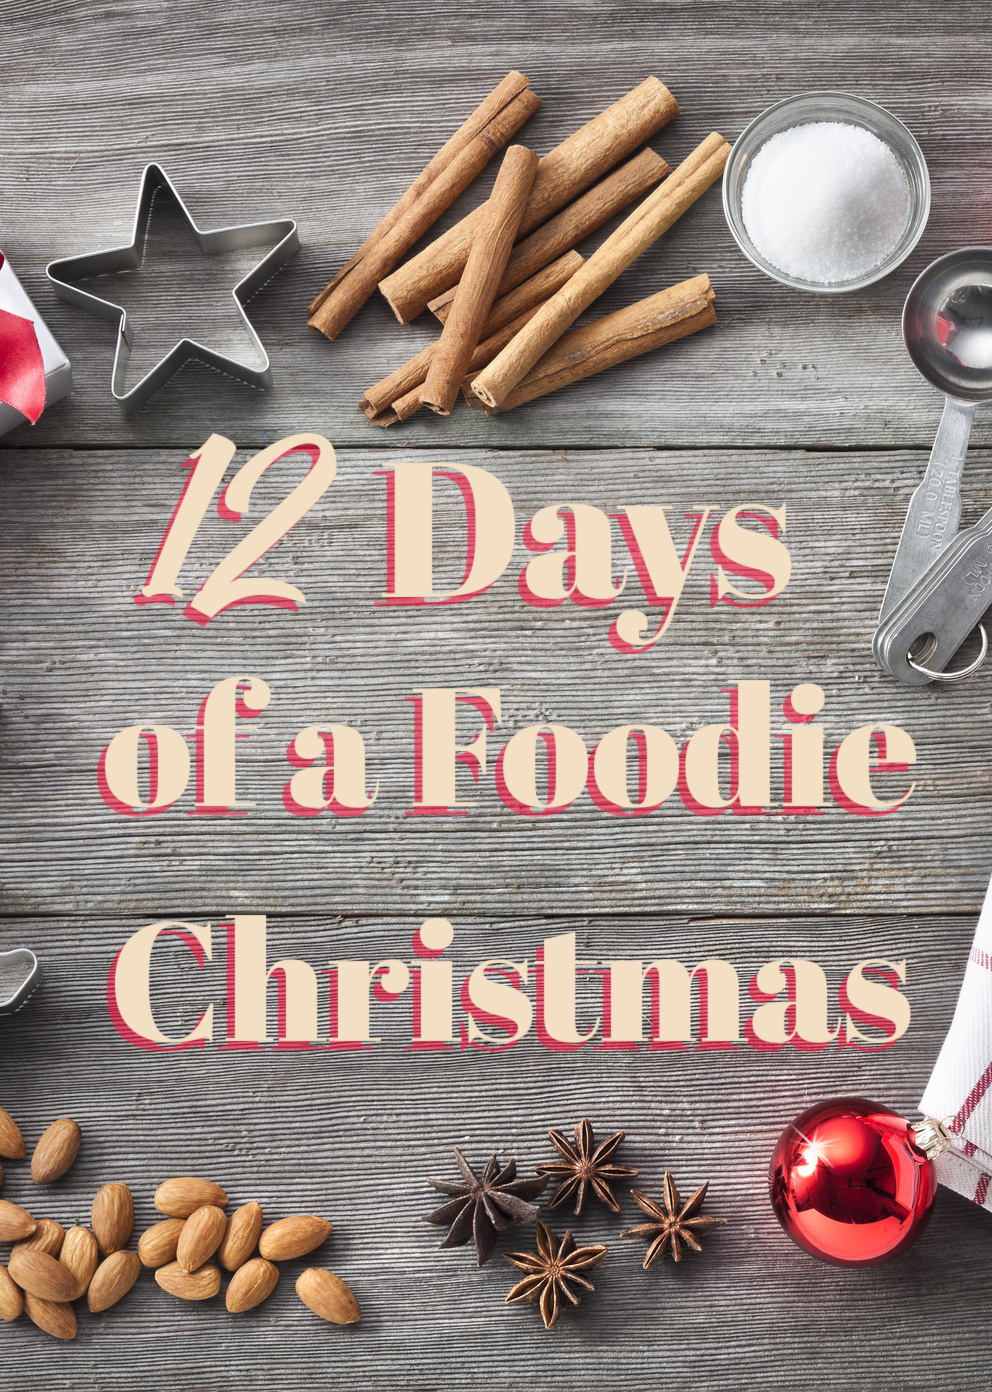 12 days of a foodie christmas pin